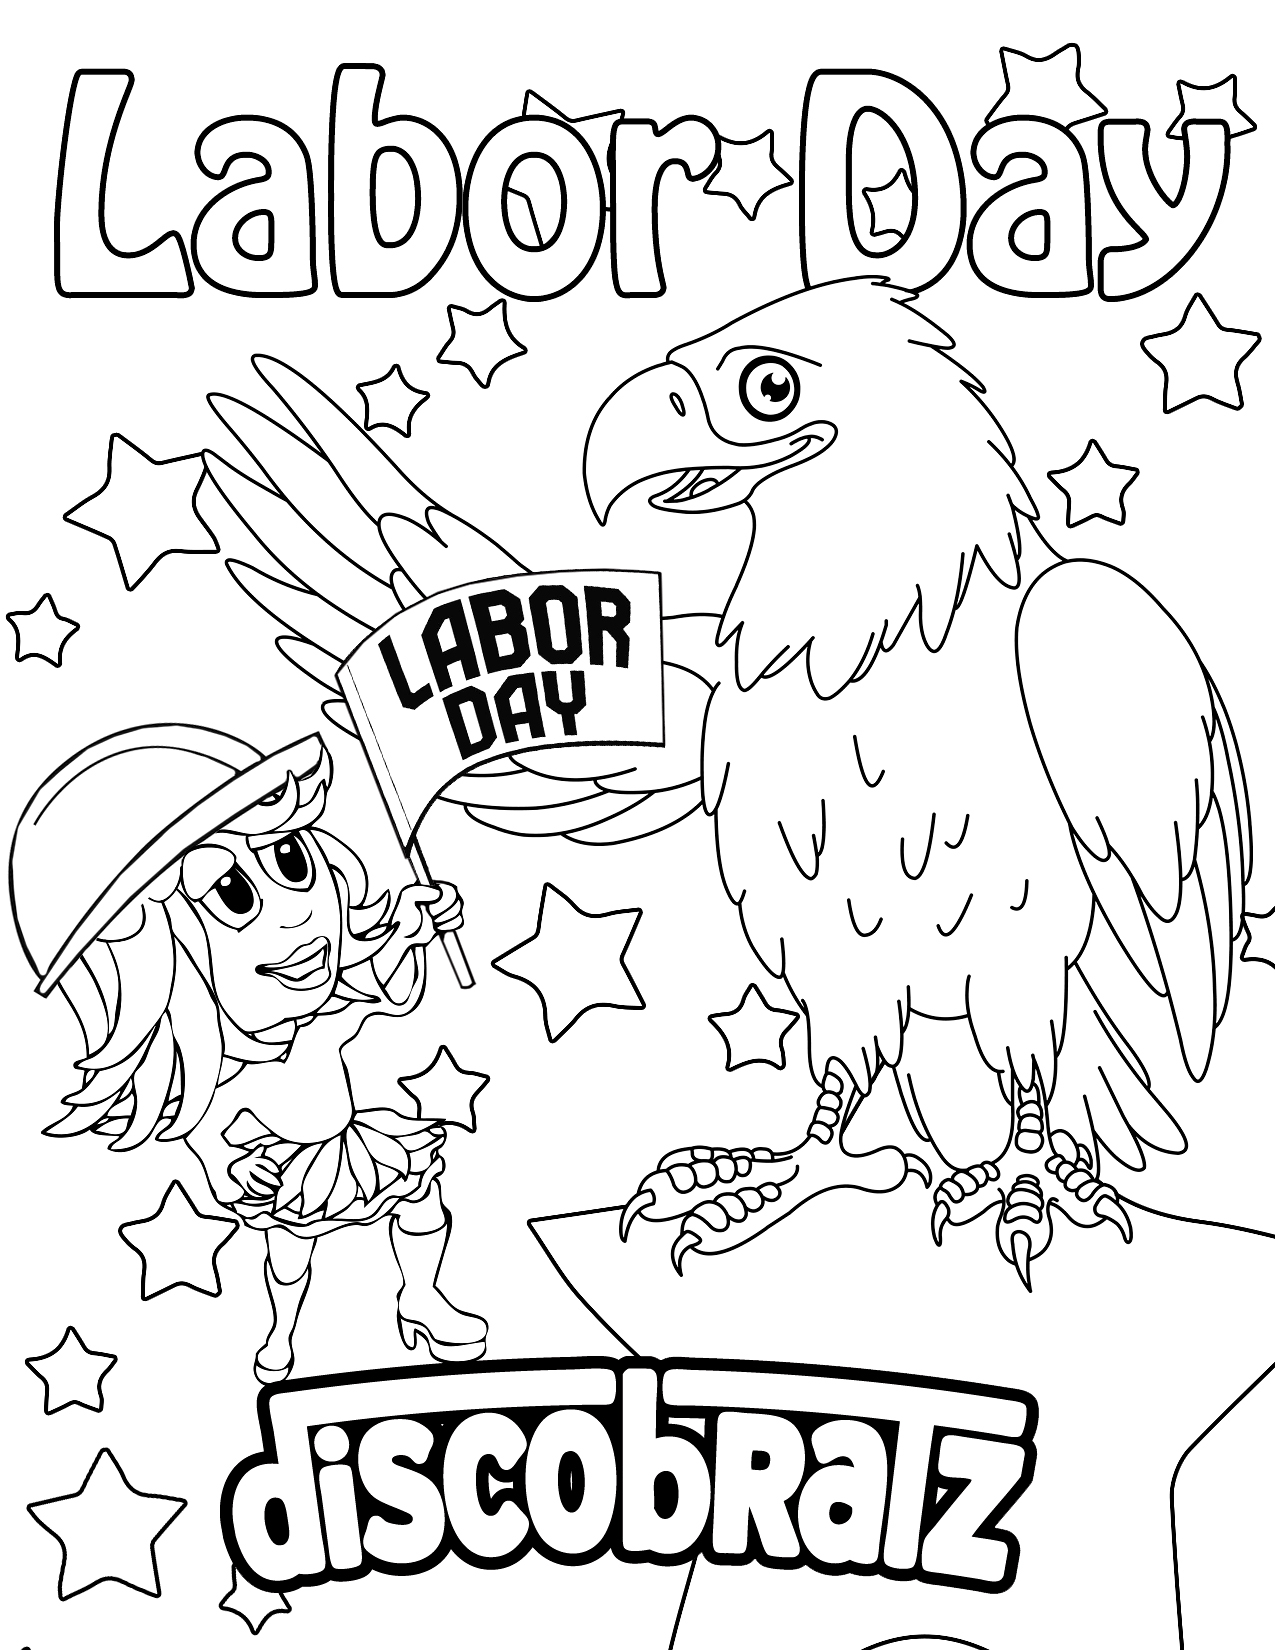 labor day coloring book pages - photo #6